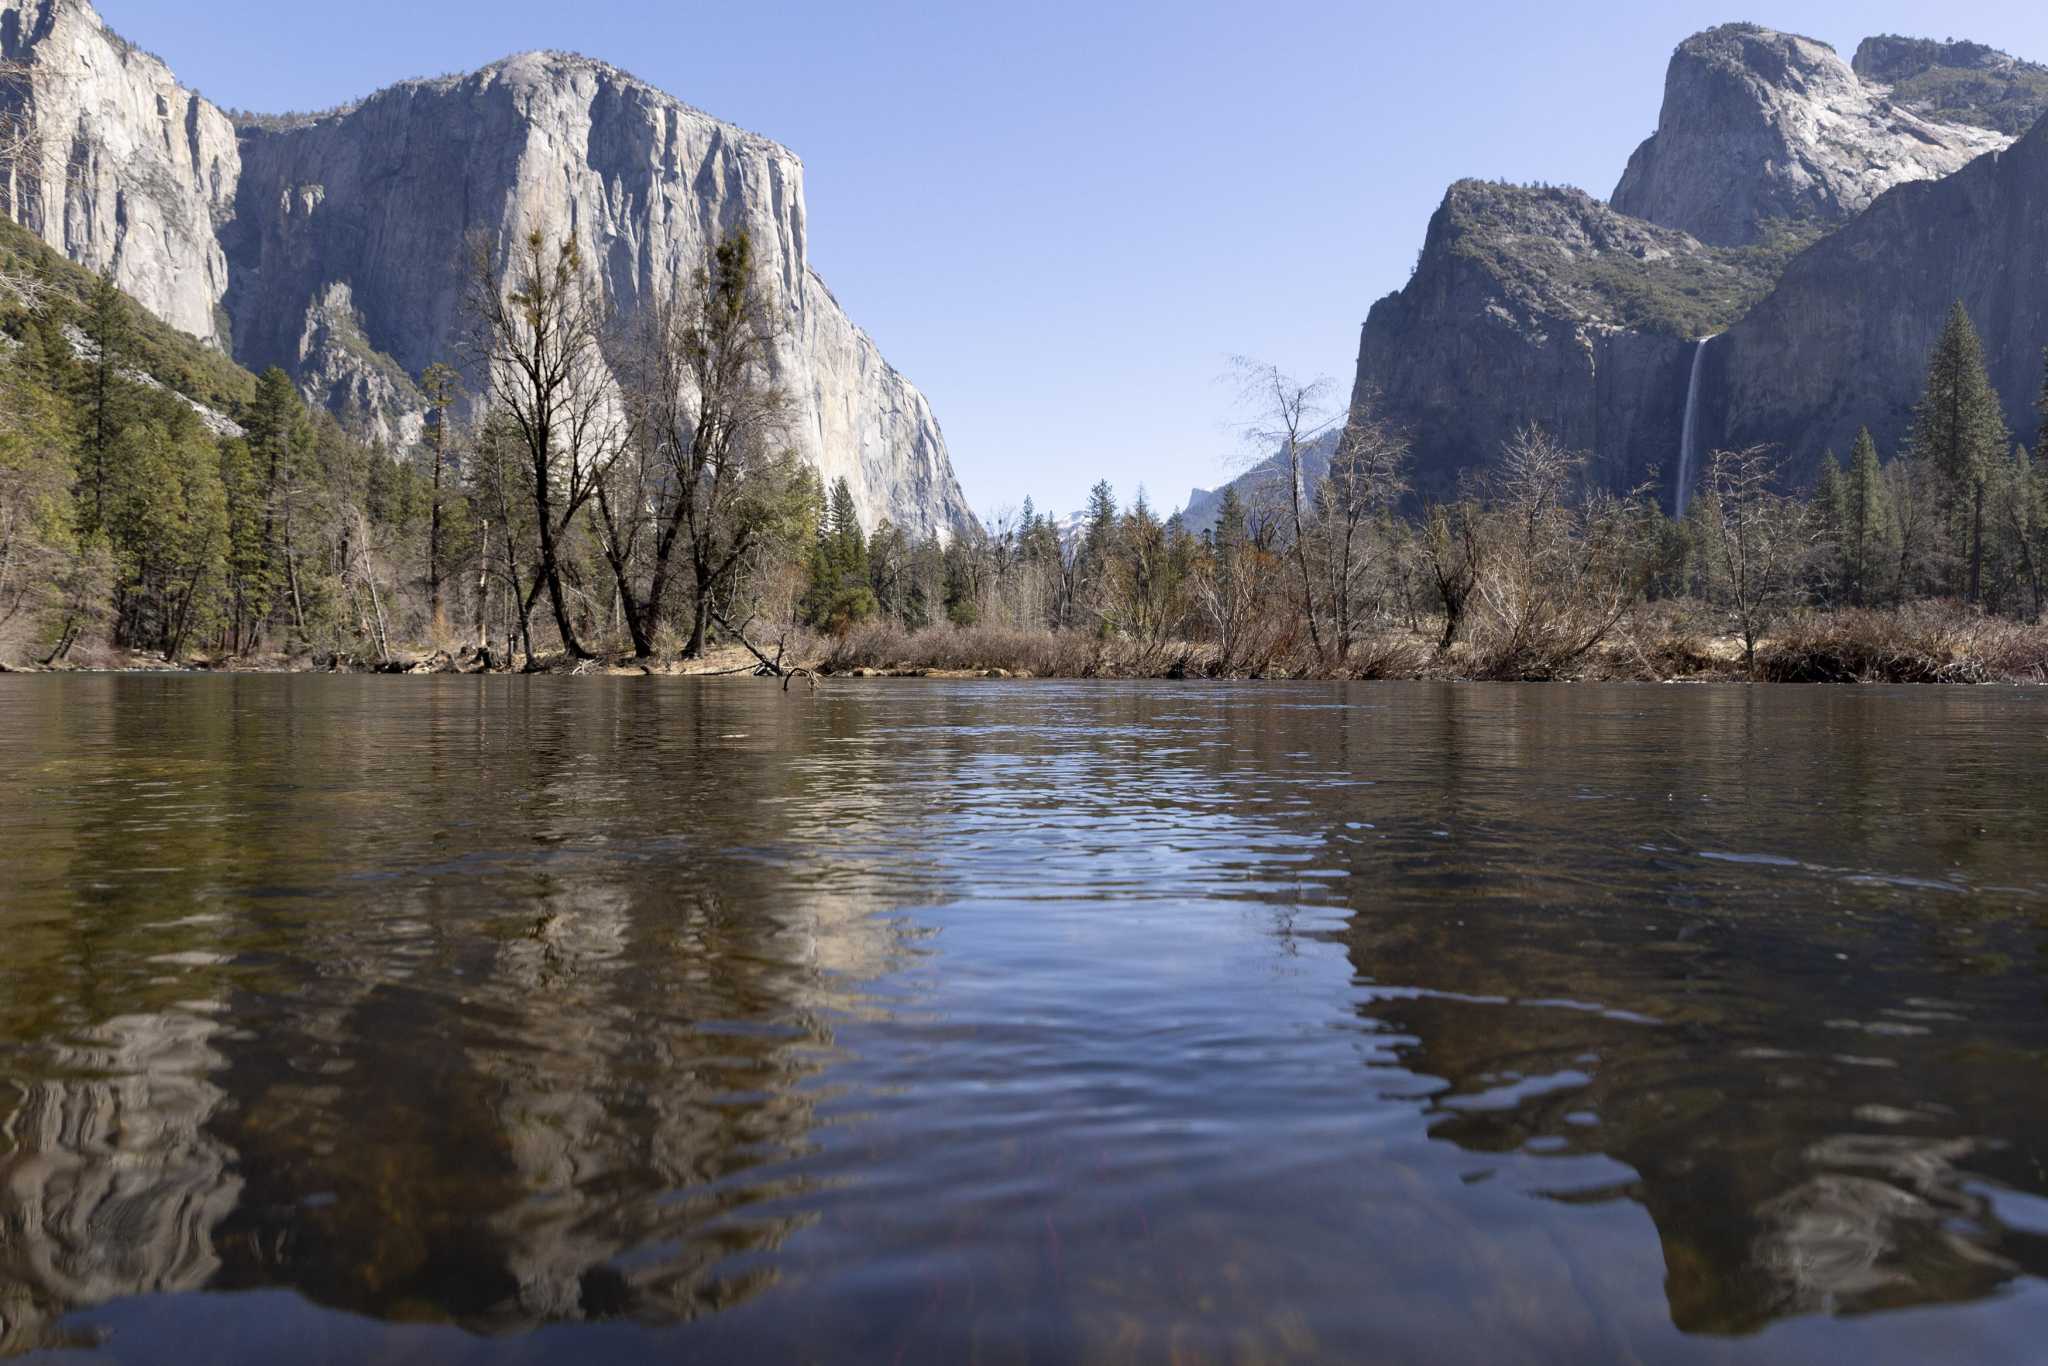 Yosemite, Kings Canyon parks could be linked by new national monument